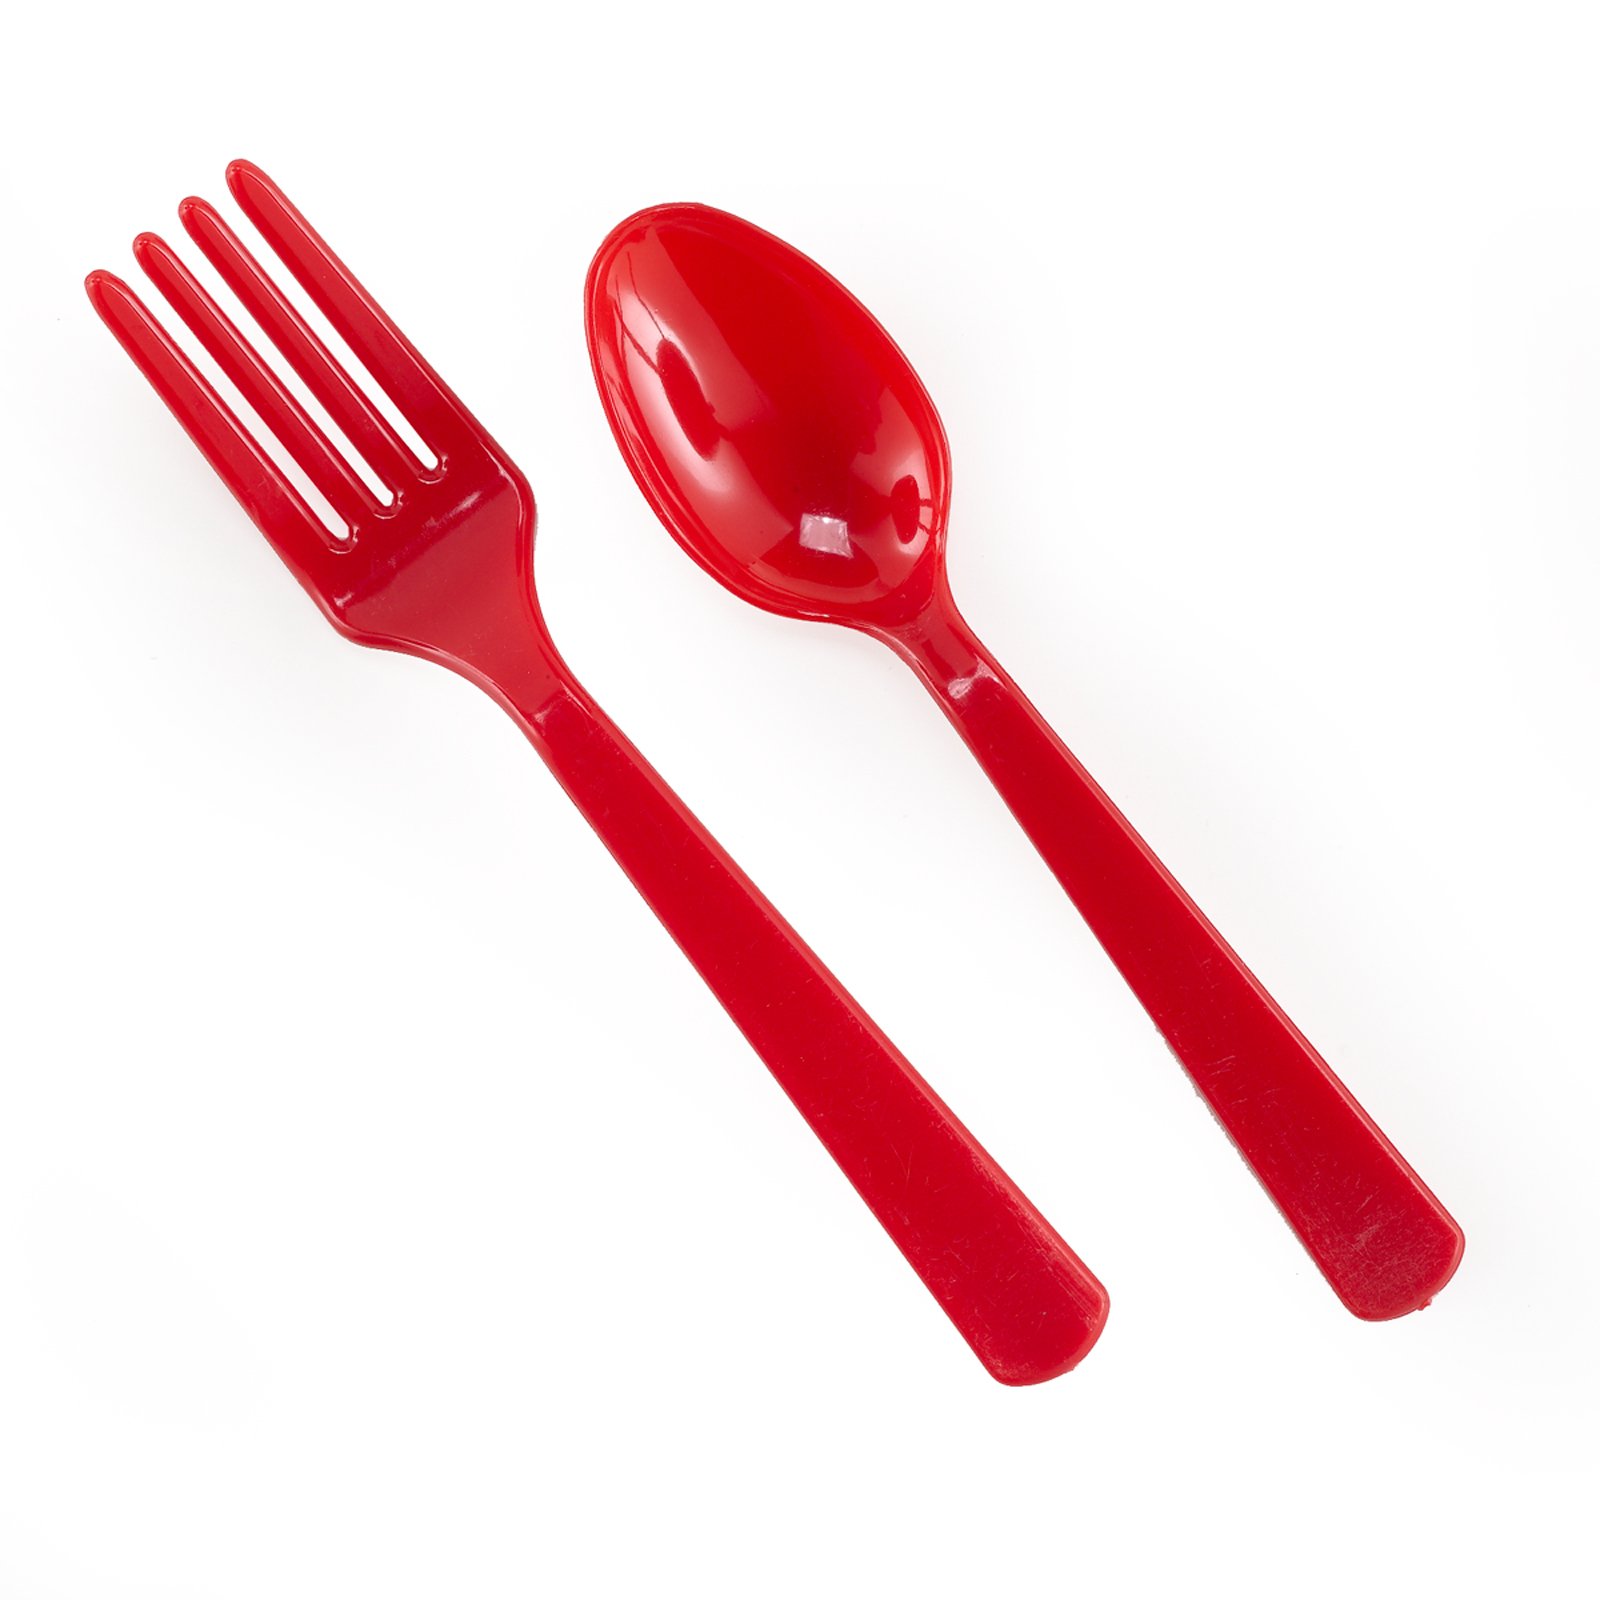 Red Forks and Spoons (8 each)